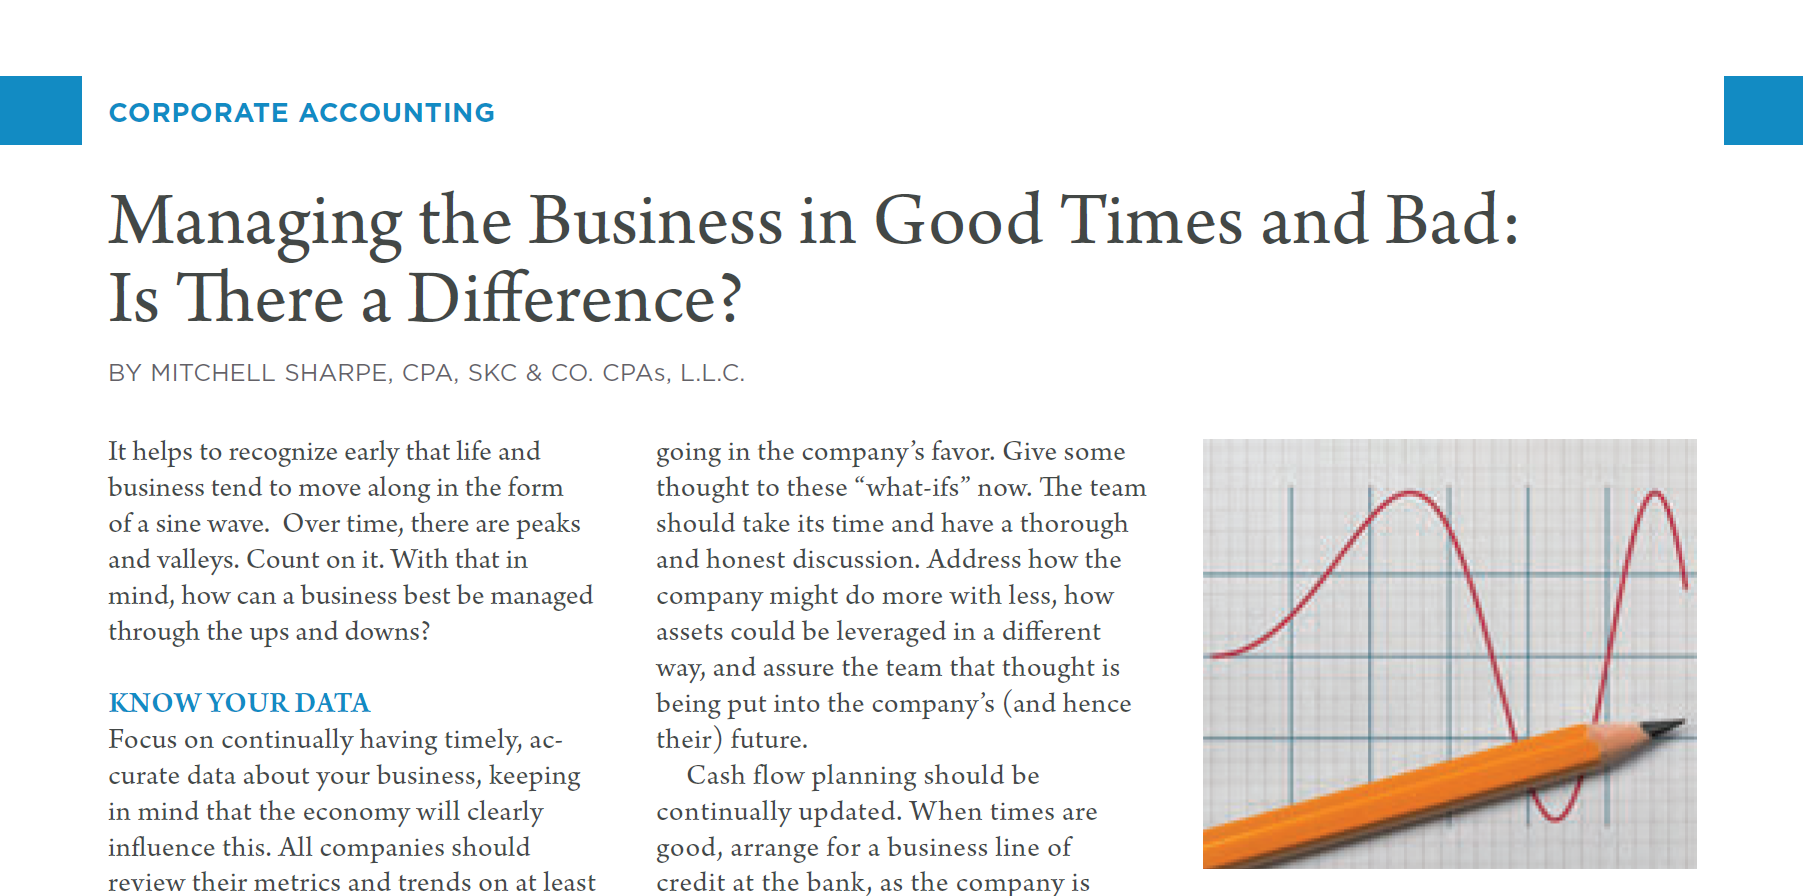 Managing the Business in Good Times and Bad